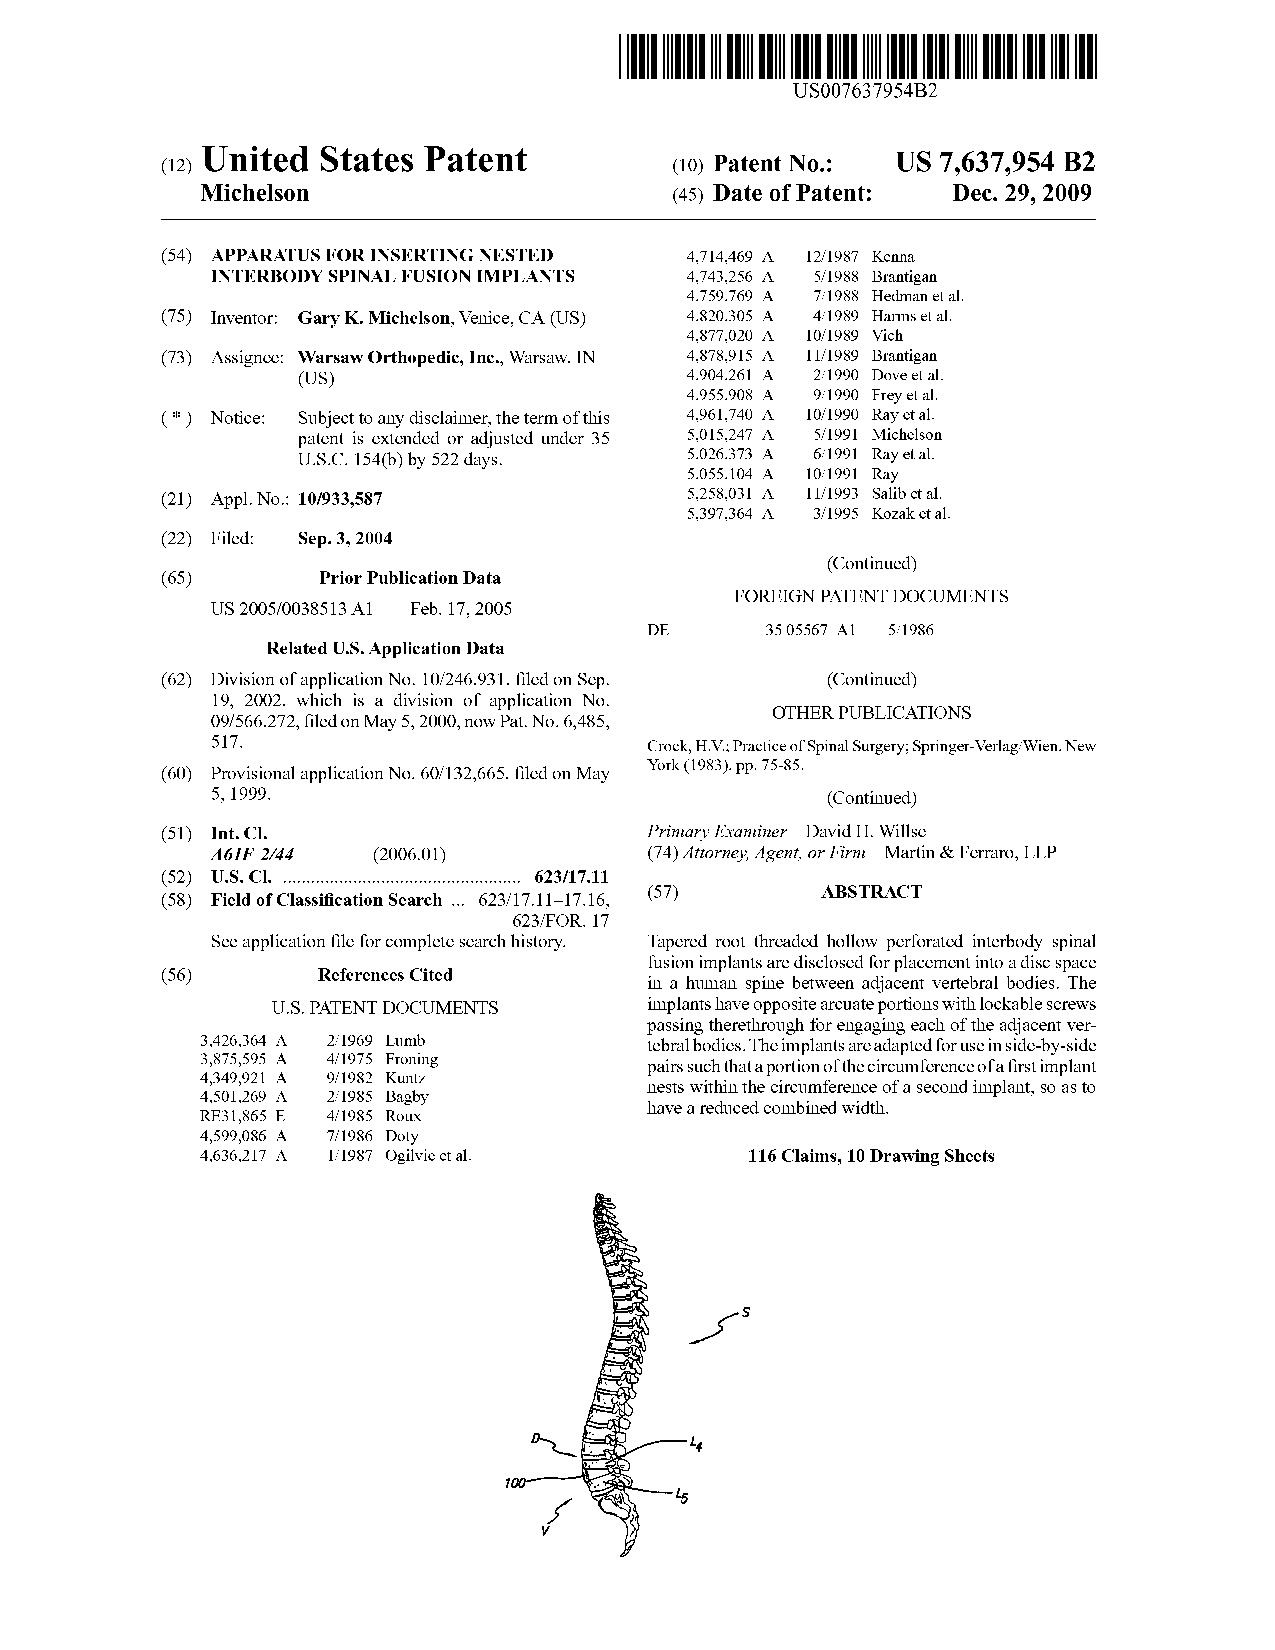 Apparatus for inserting nested interbody spinal fusion implants - Patent 7,637,954